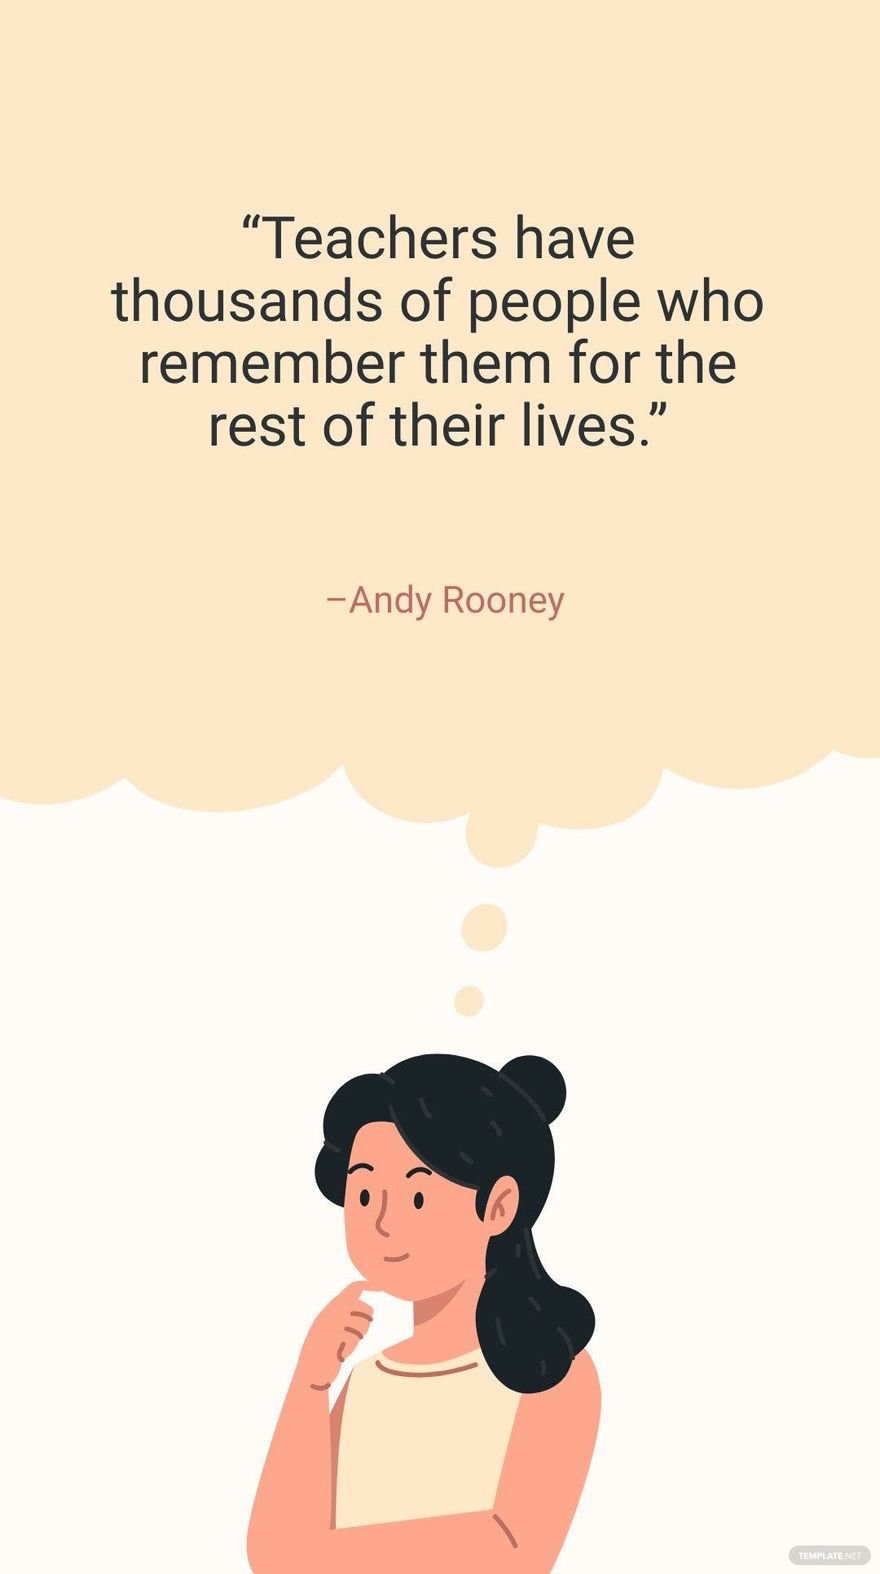 Andy Rooney - Teachers have thousands of people who remember them for the rest of their lives.